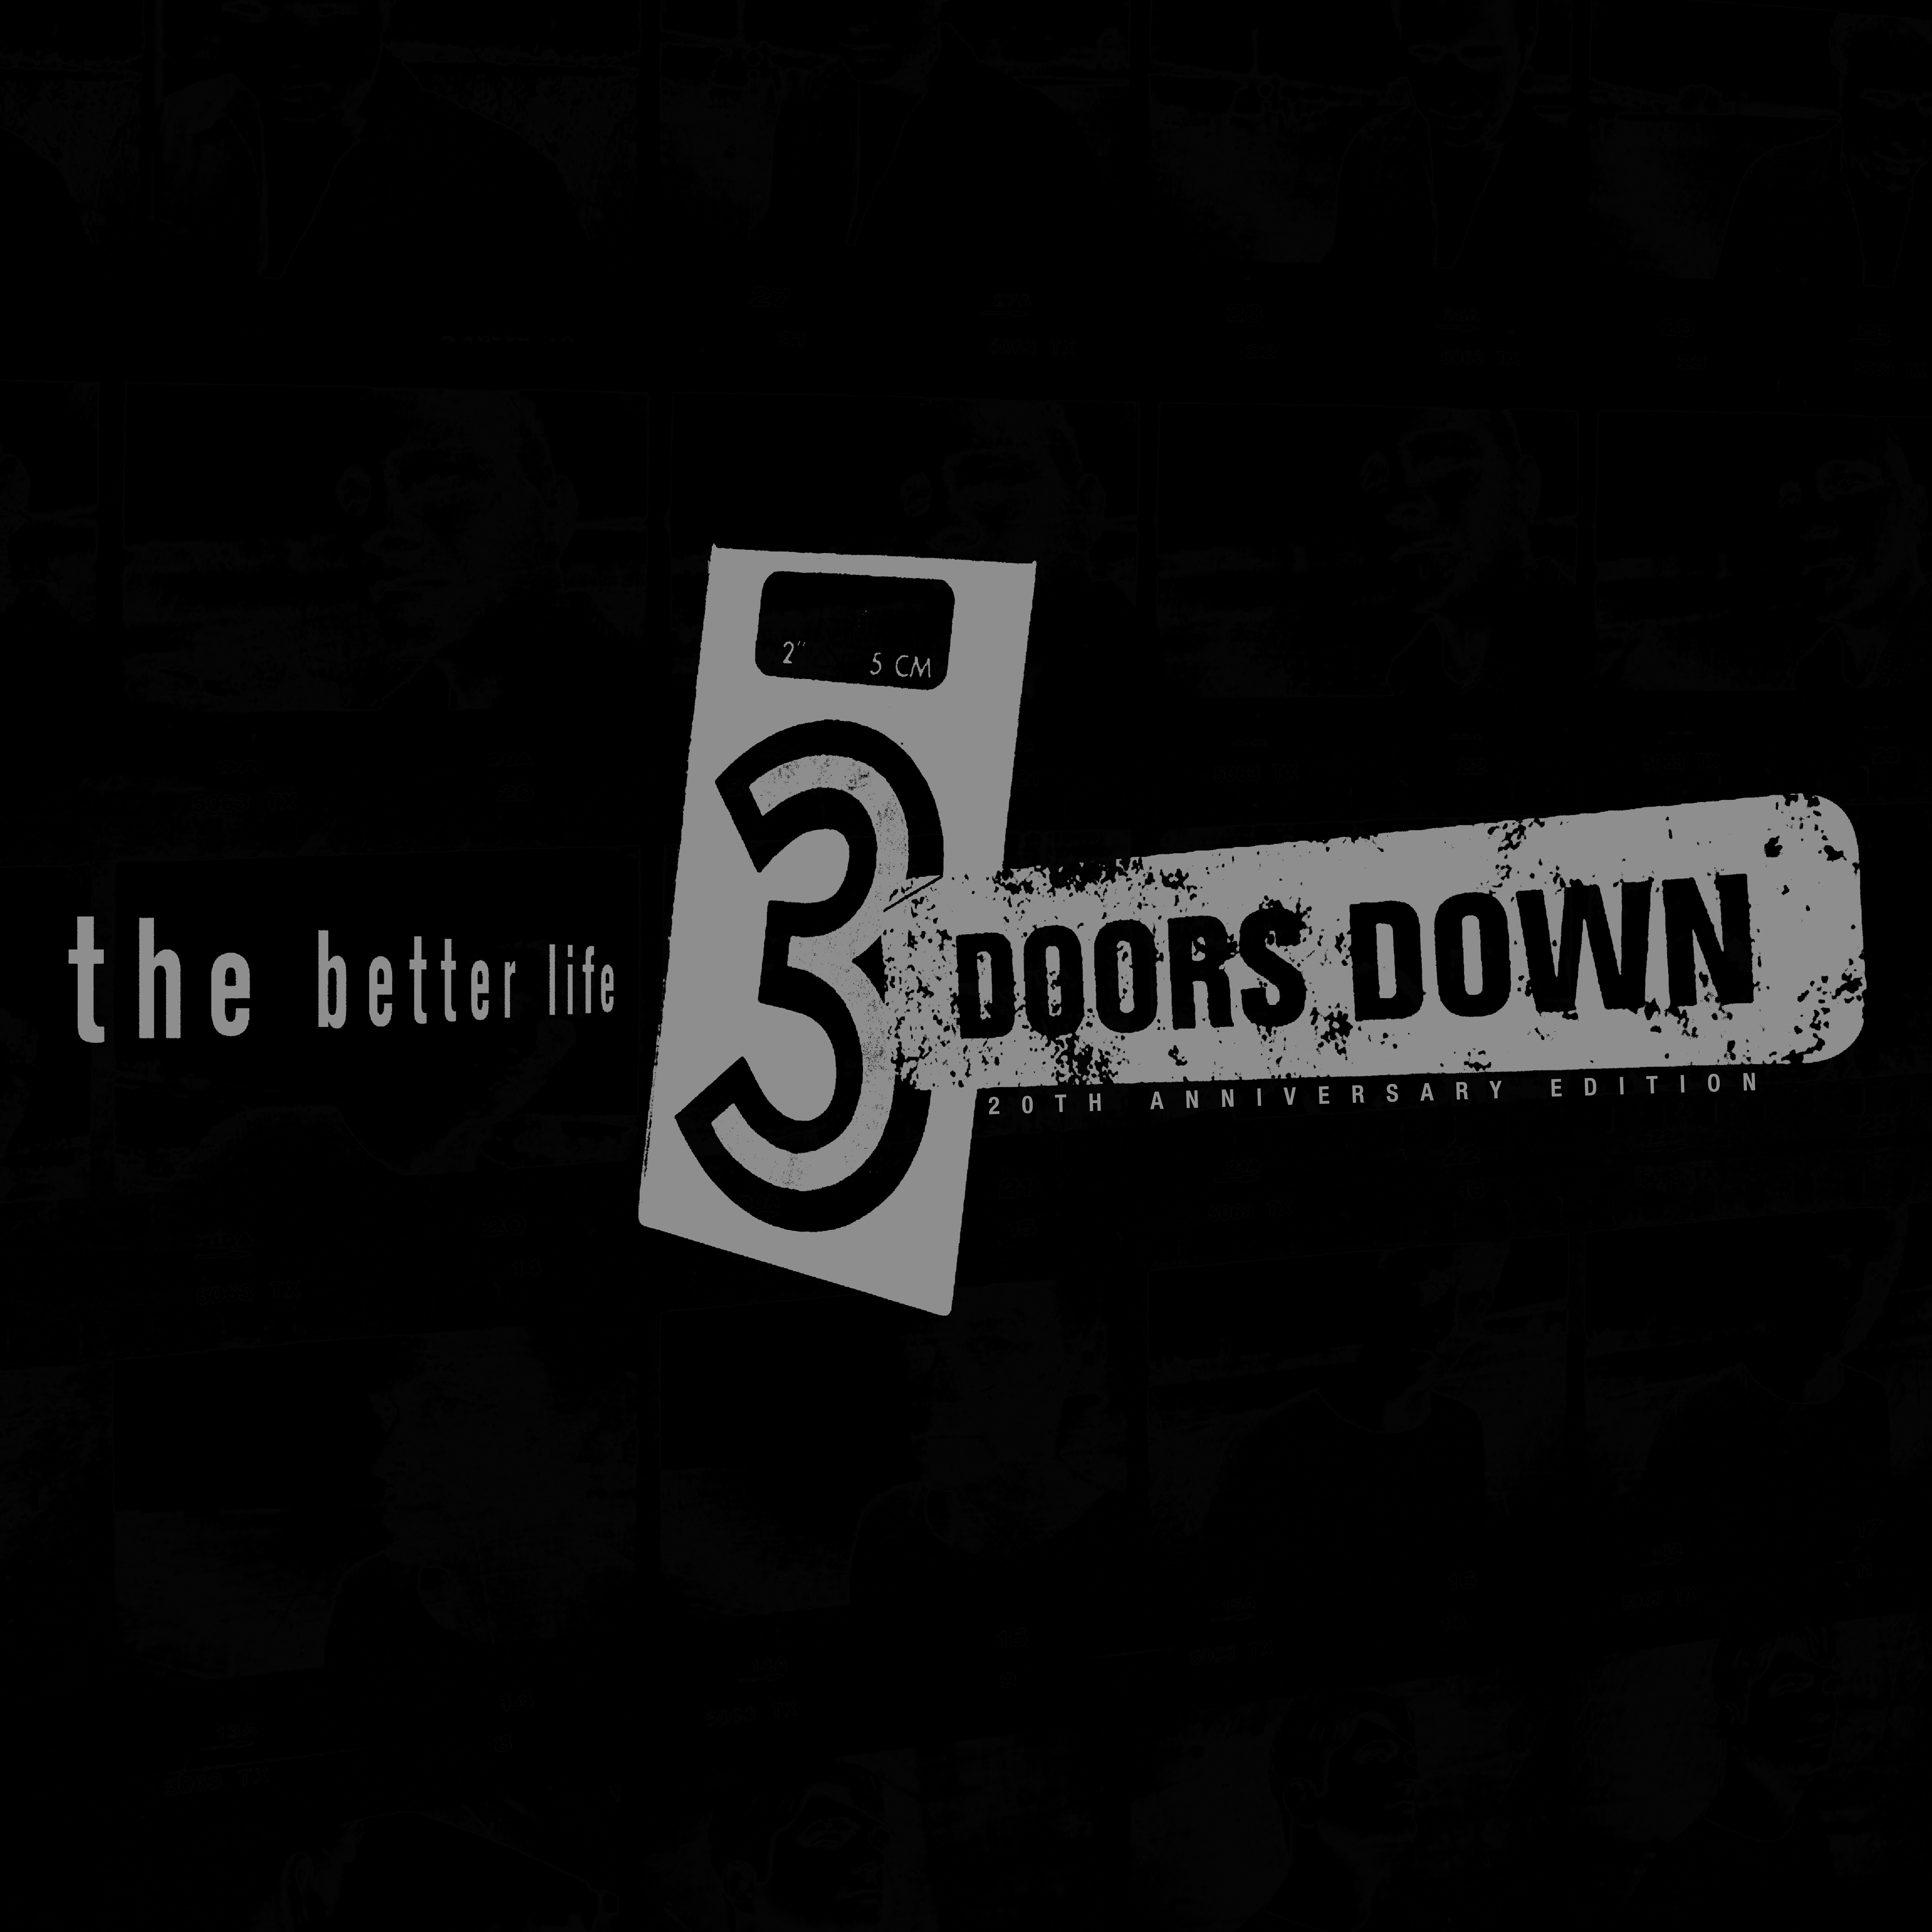 Art for Down Poison (Clean) by 3 Doors Down